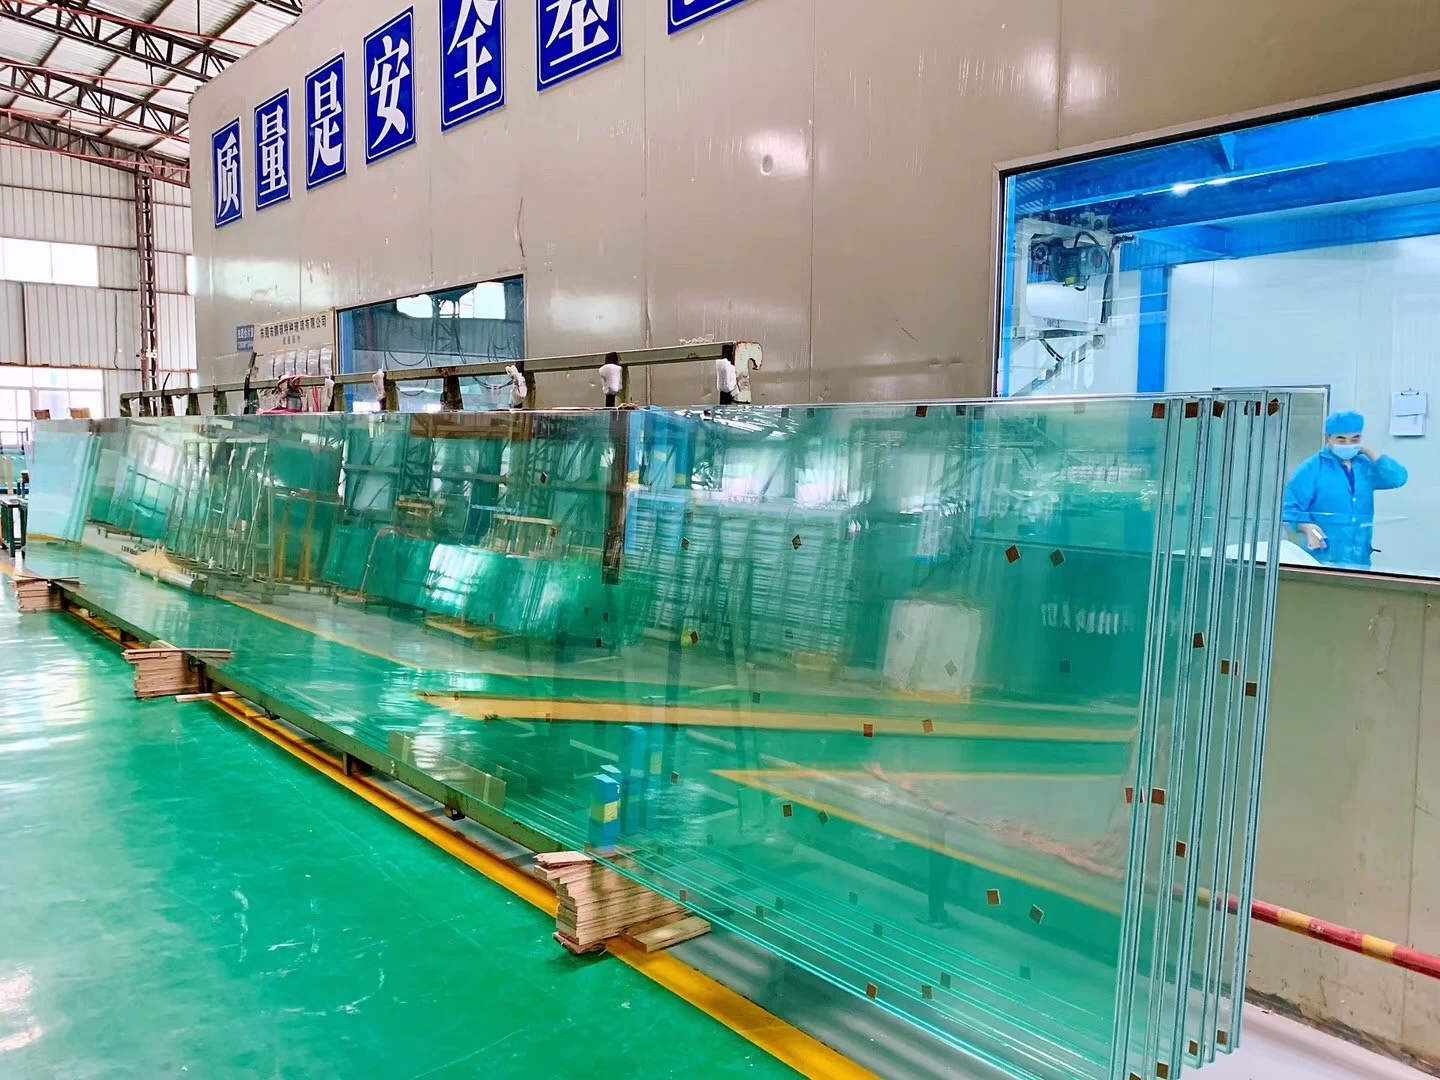 15mm+15mm low iron laminated glass, 15+15 ESG VSG extra clear, super white tempered laminated glass,15+15mm low iron ESG VSG, 15+15 Starphire laminated glass, jumbo size glass